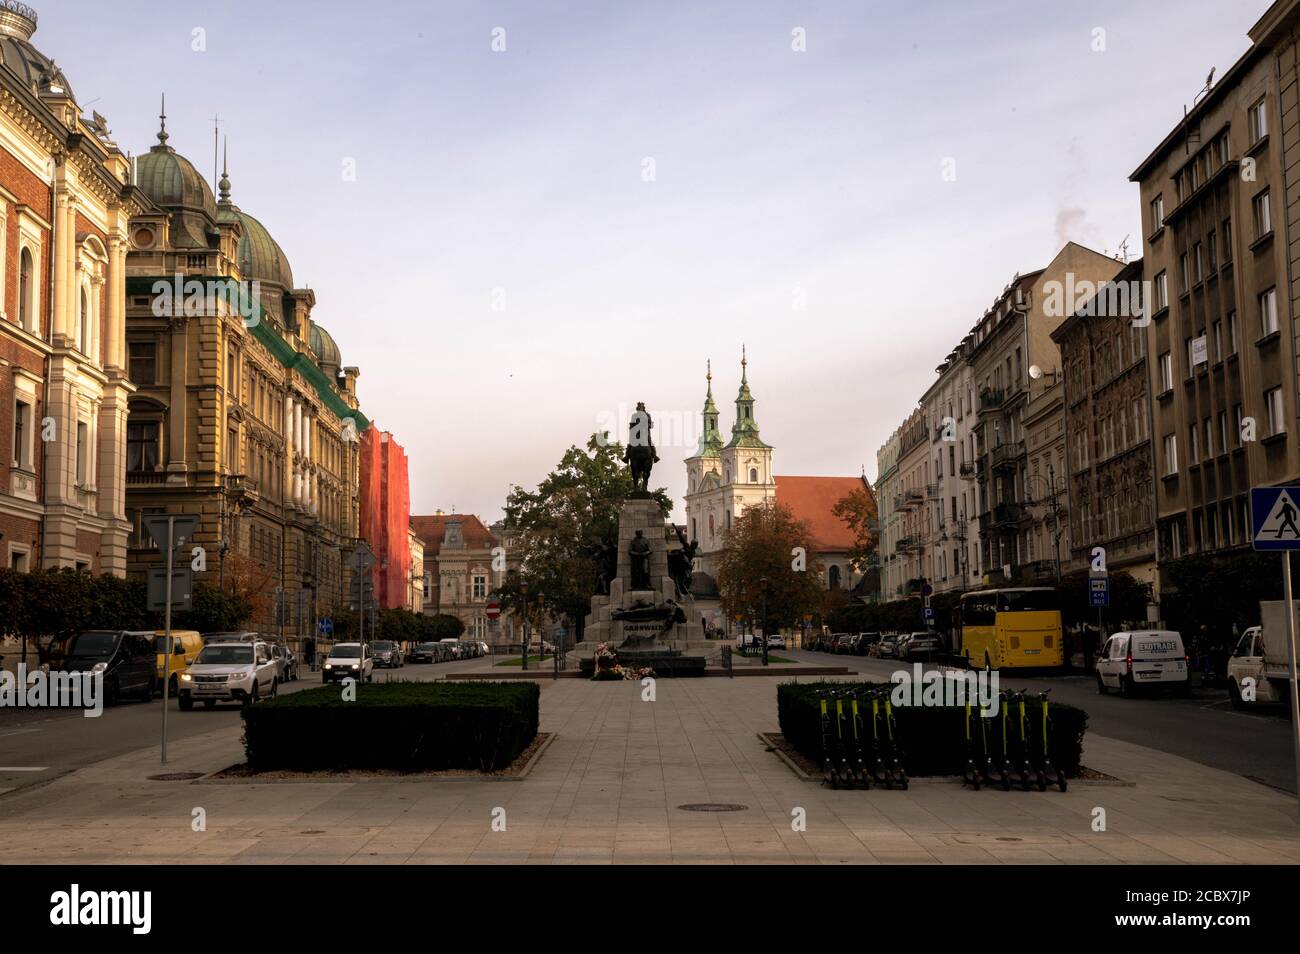 Battle of Grunwald monument In Old Town in Krakow Stock Photo